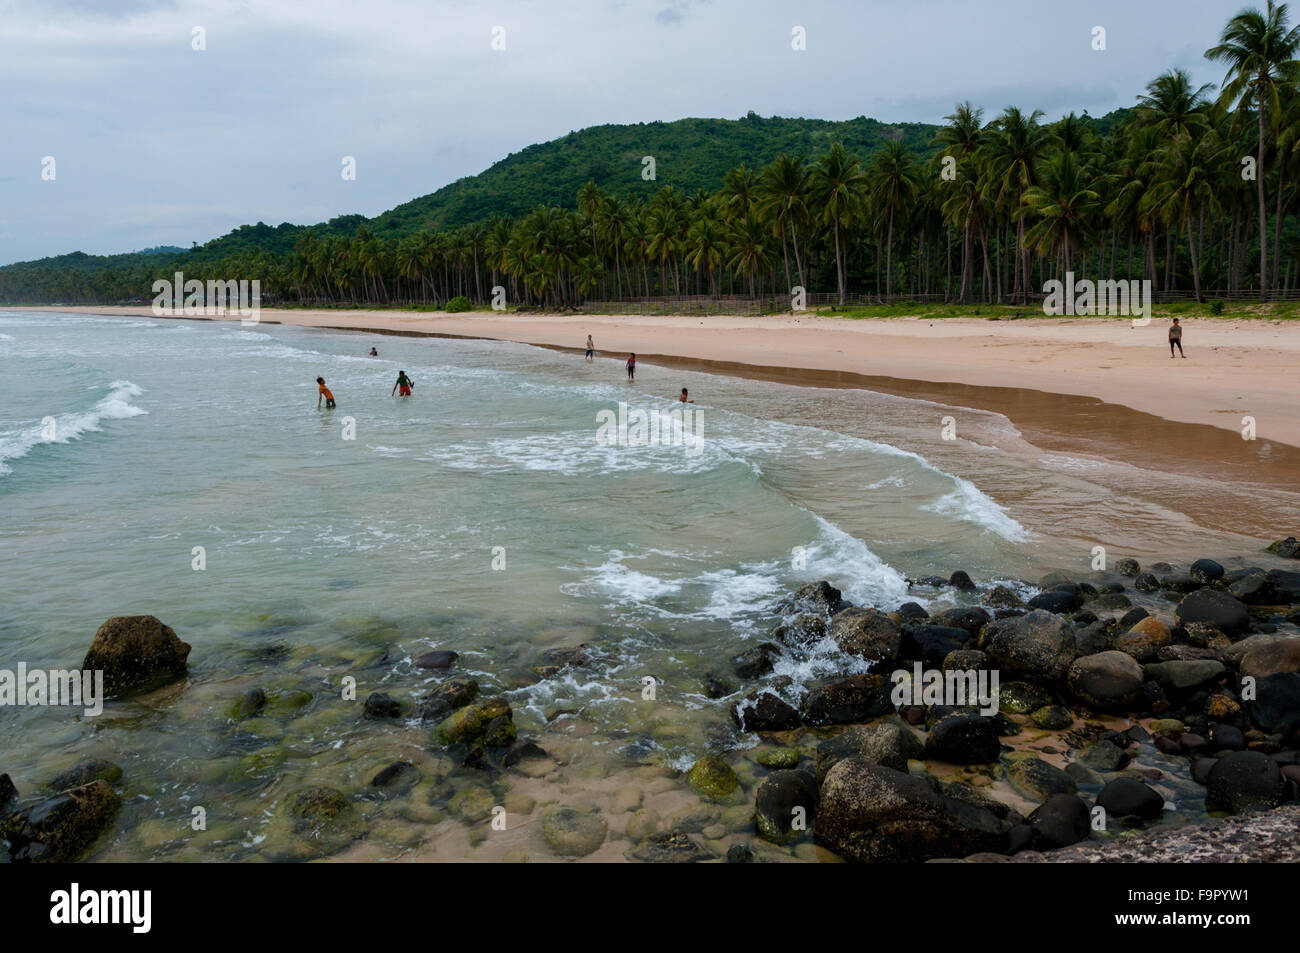 Children Playing and Swimming at the beach full of palm trees Stock Photo